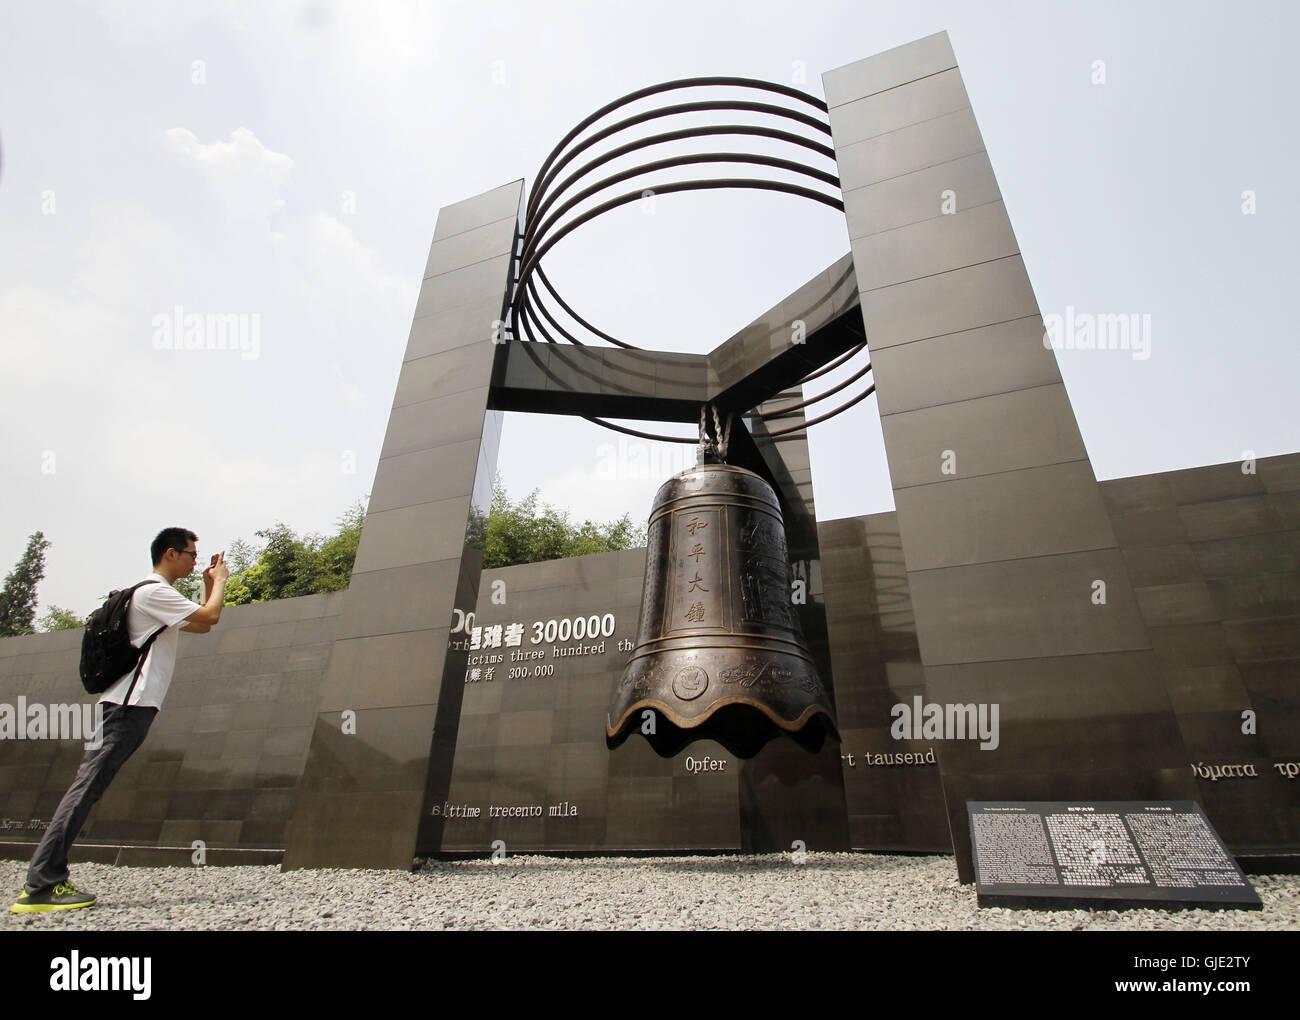 Nanjing, Nanjing, China. 16th Aug, 2016. Nanjing, CHINA - August 6 2016: (EDITORIAL USE ONLY. CHINA OUT) Visitors look at the files and ironclads of Japanese invaders' cruel massacre at Nanjing Massacre VictimsÂ¡Â¯ Memorial Hall. Tomomi Inada, who was appointed as Japanese defense minister, denied the existence of killing competition during the Nanjing Massacre that left an estimated 300,000 people dead in interviews with local media on August 4, 2016. China recently slammed the new Japanese ministerÂ¡Â¯s fault of denying the history and said that Japan should face up to the fact. (Credit I Stock Photo